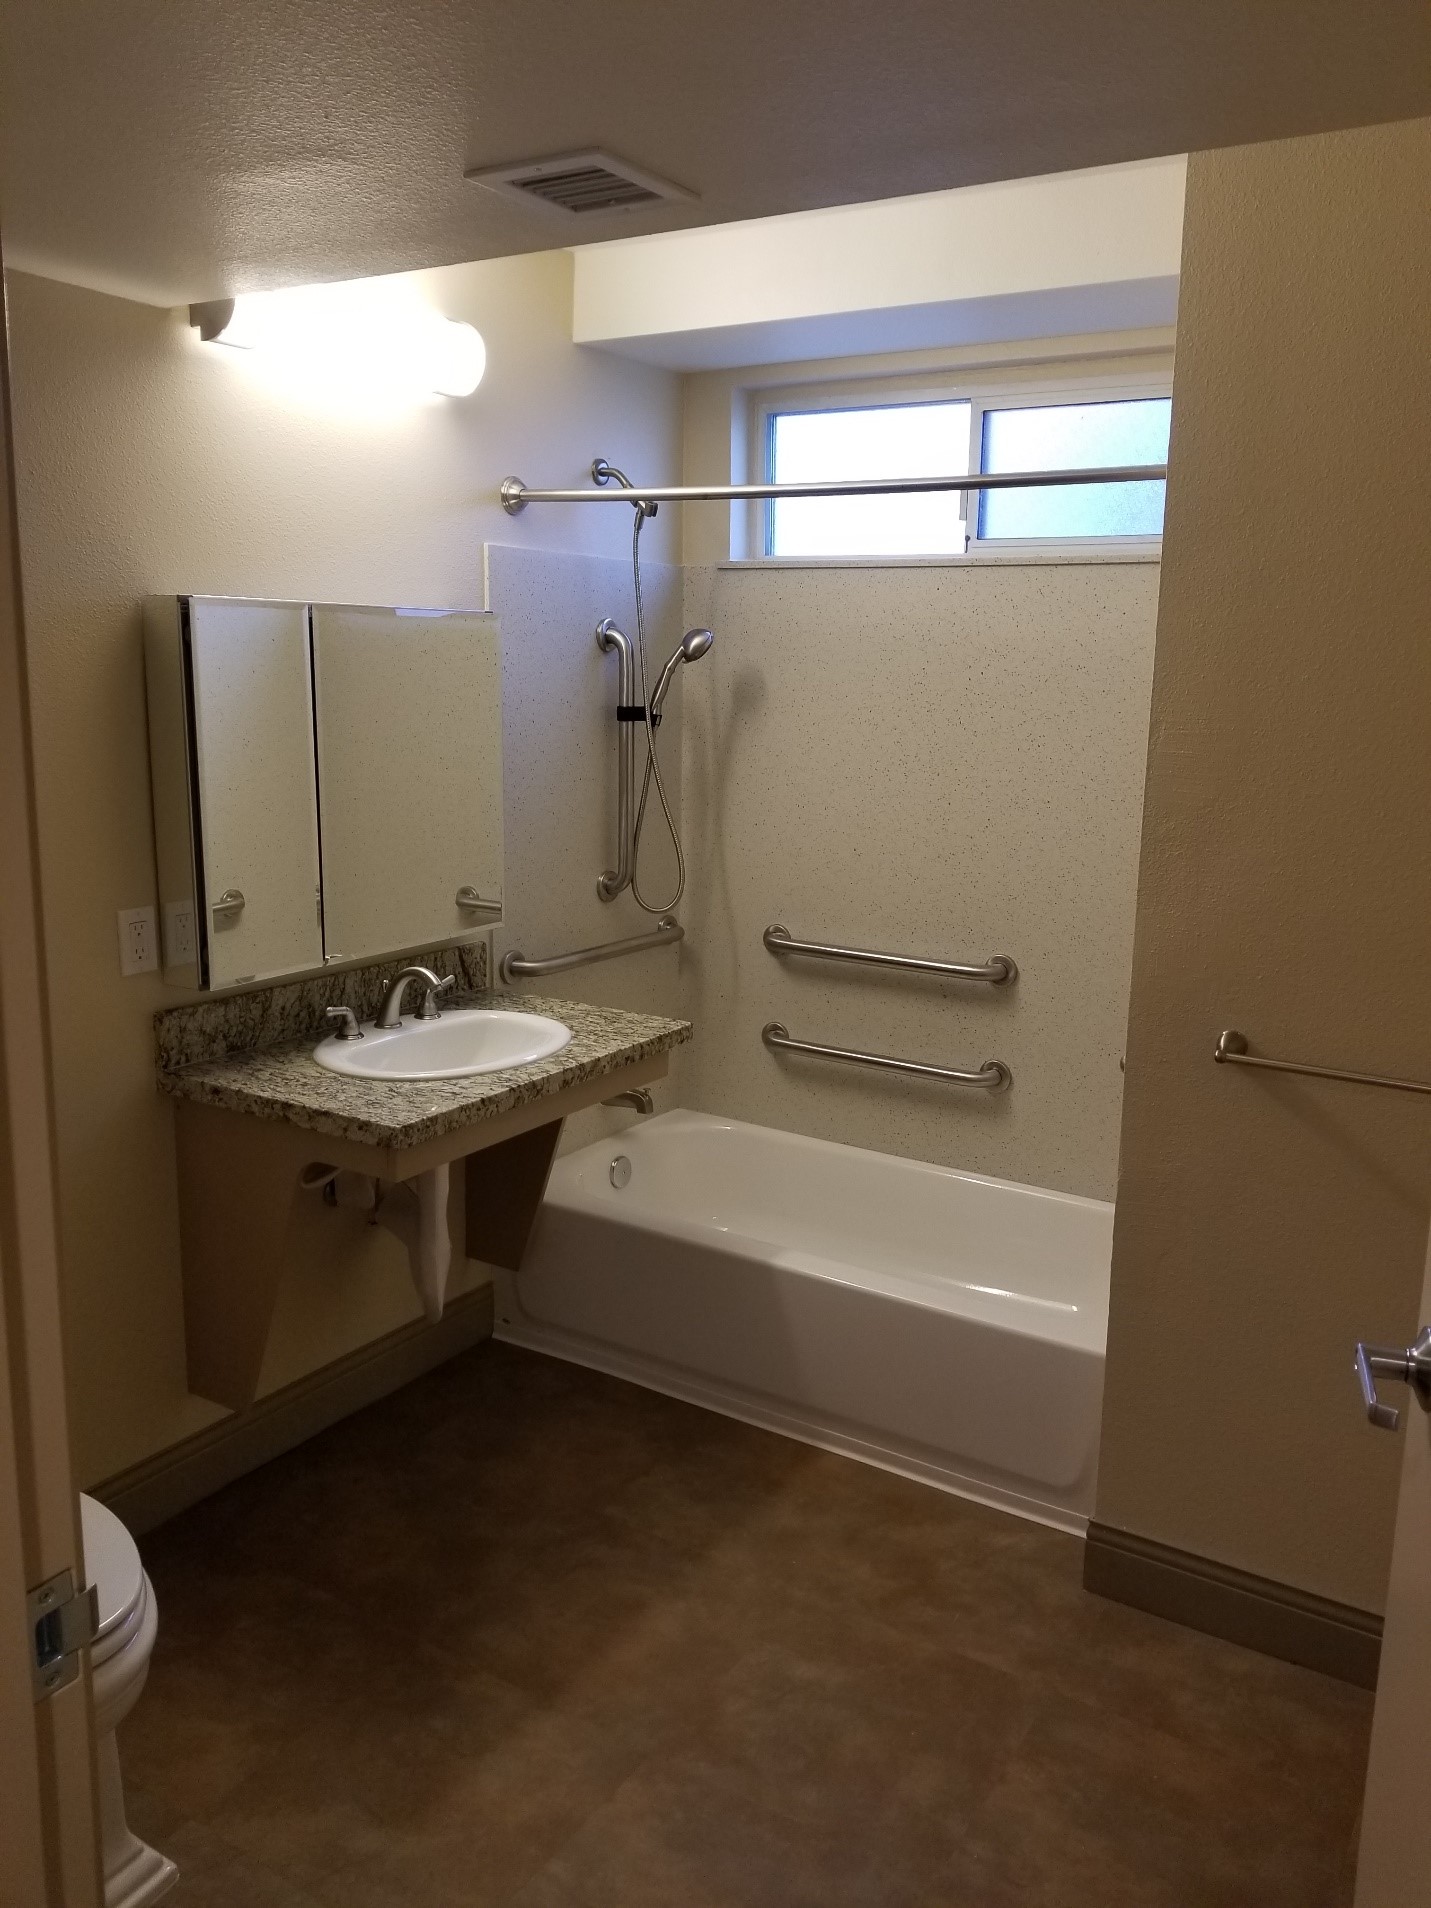 Accessible bathroom: lowered sink, shower bath with grab bars and snake shower head